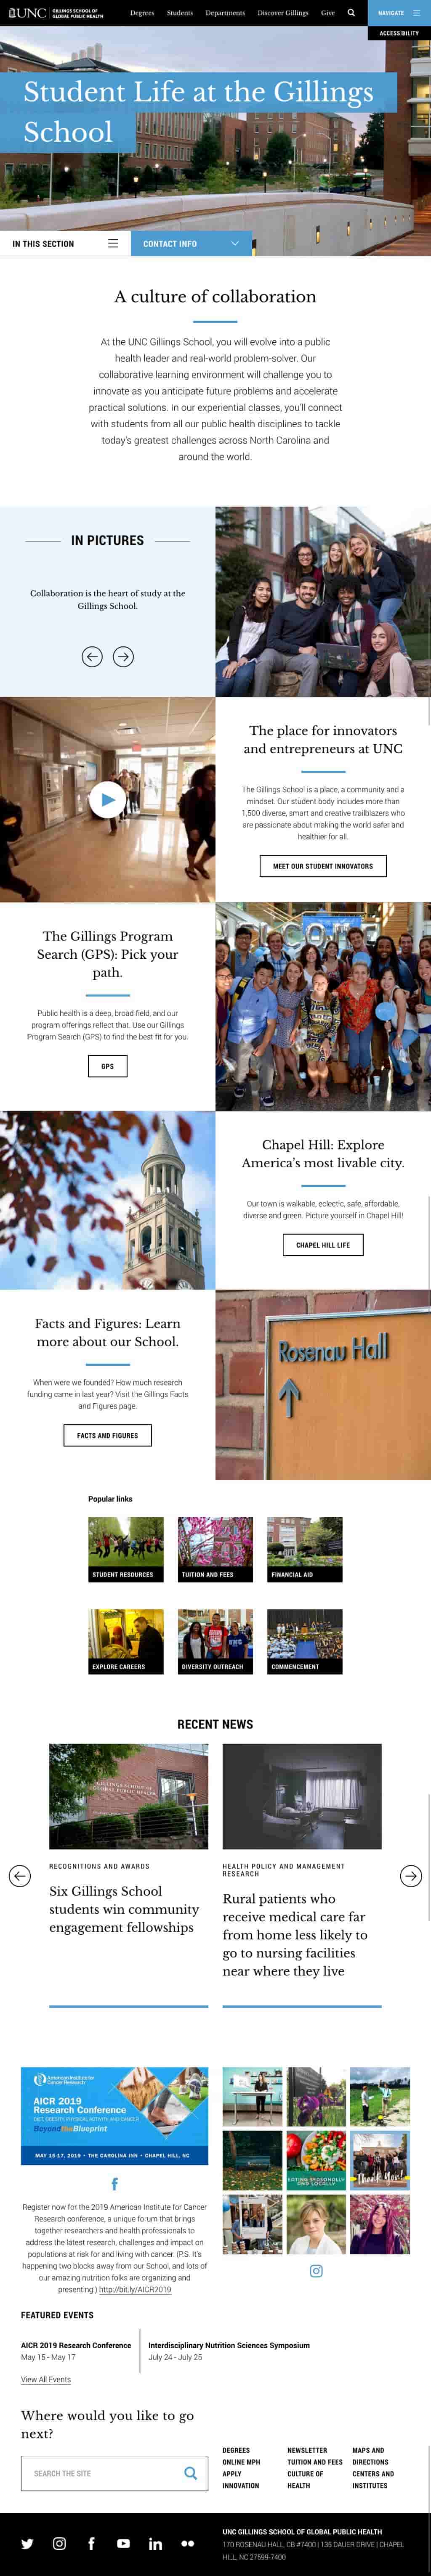 UNC Gillings School website Student Life landing page on tablet